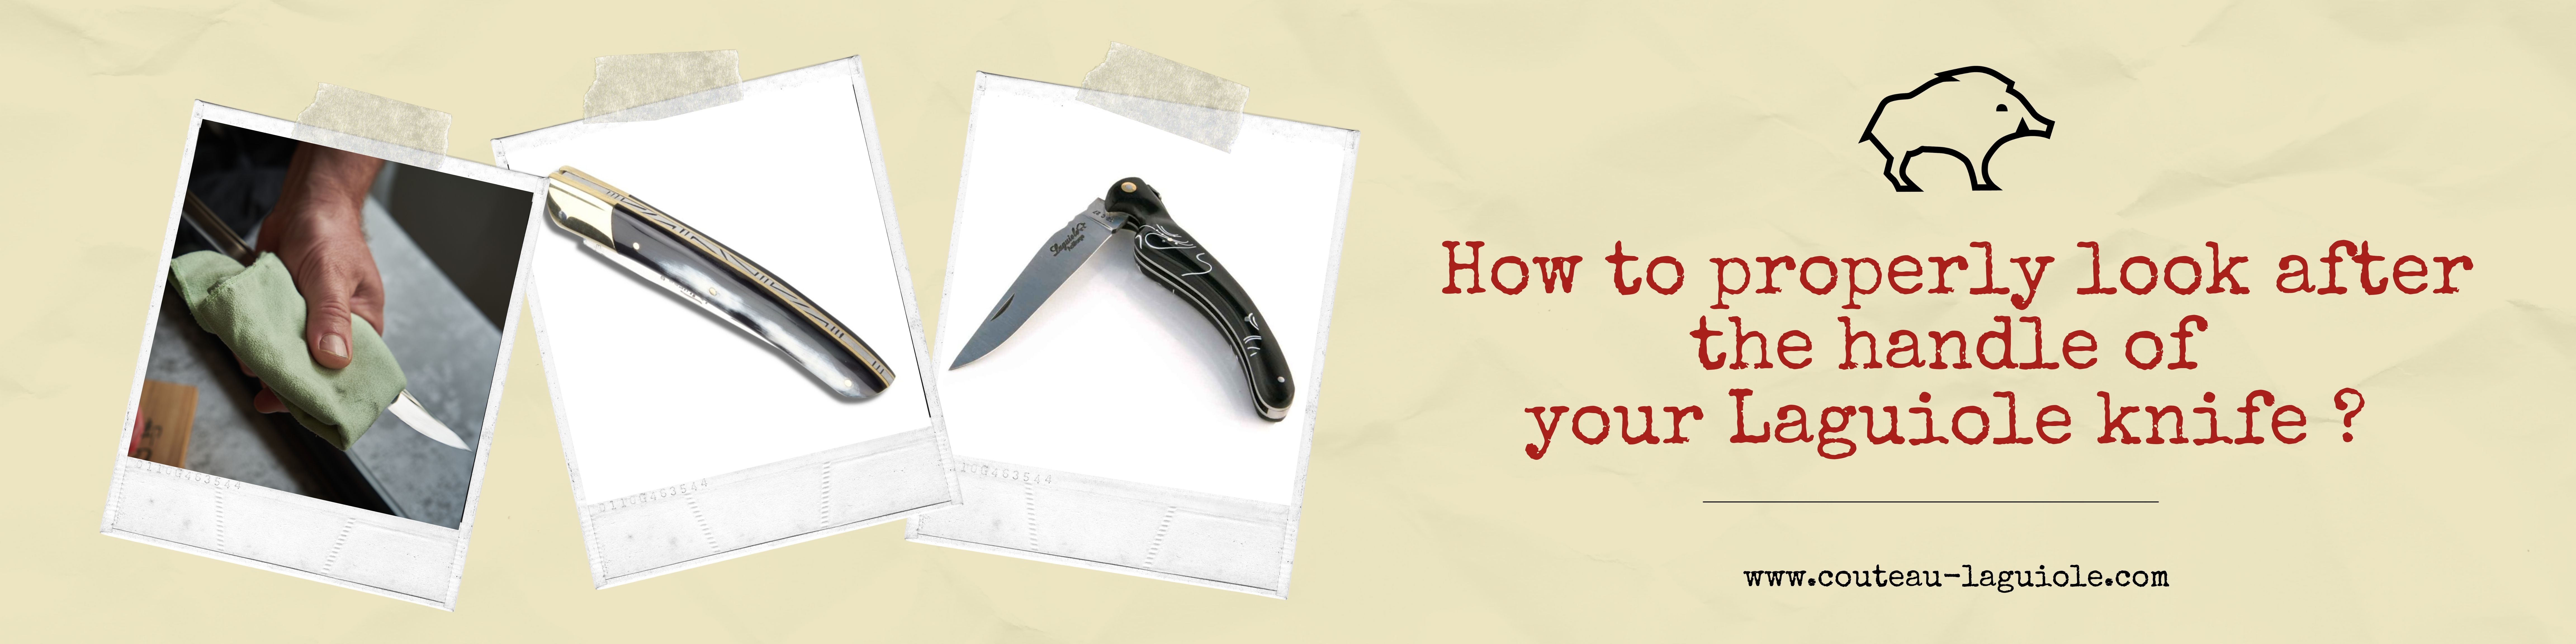 How to properly look after the handle of your Laguiole knife 